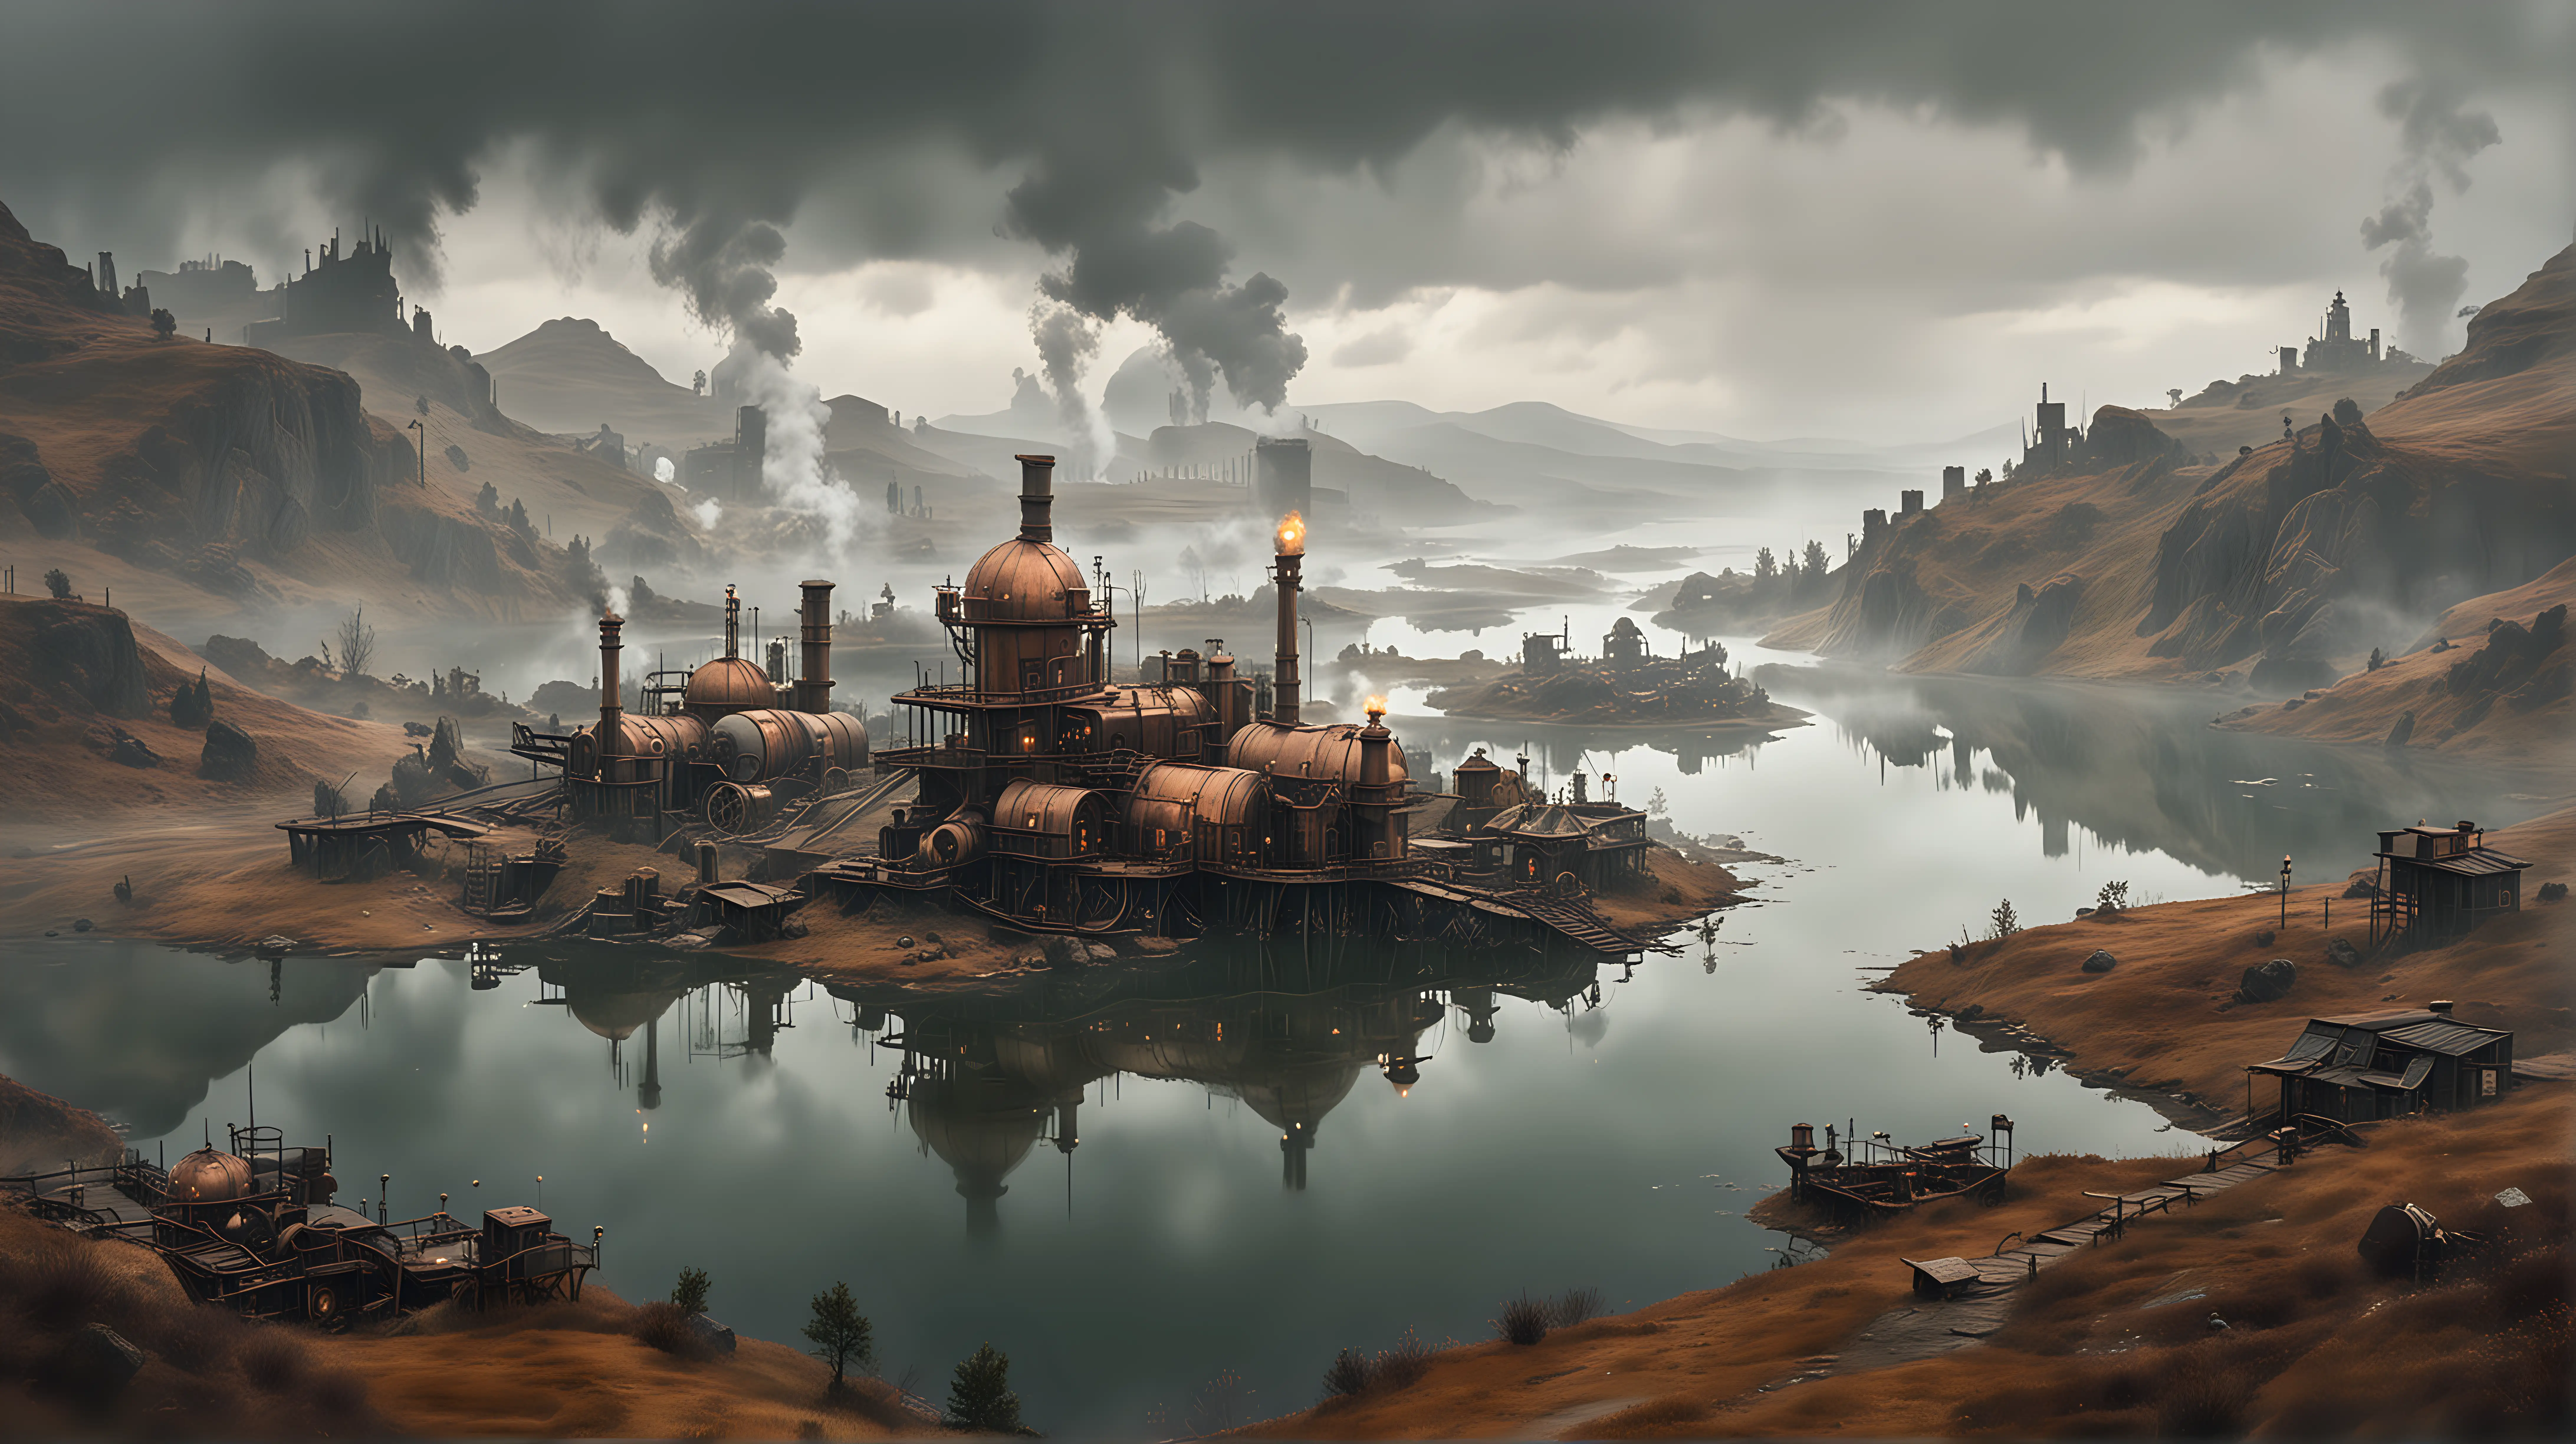 Steampunk Colony Between Wild Lakes Steam and Copper in Rainy Atmosphere